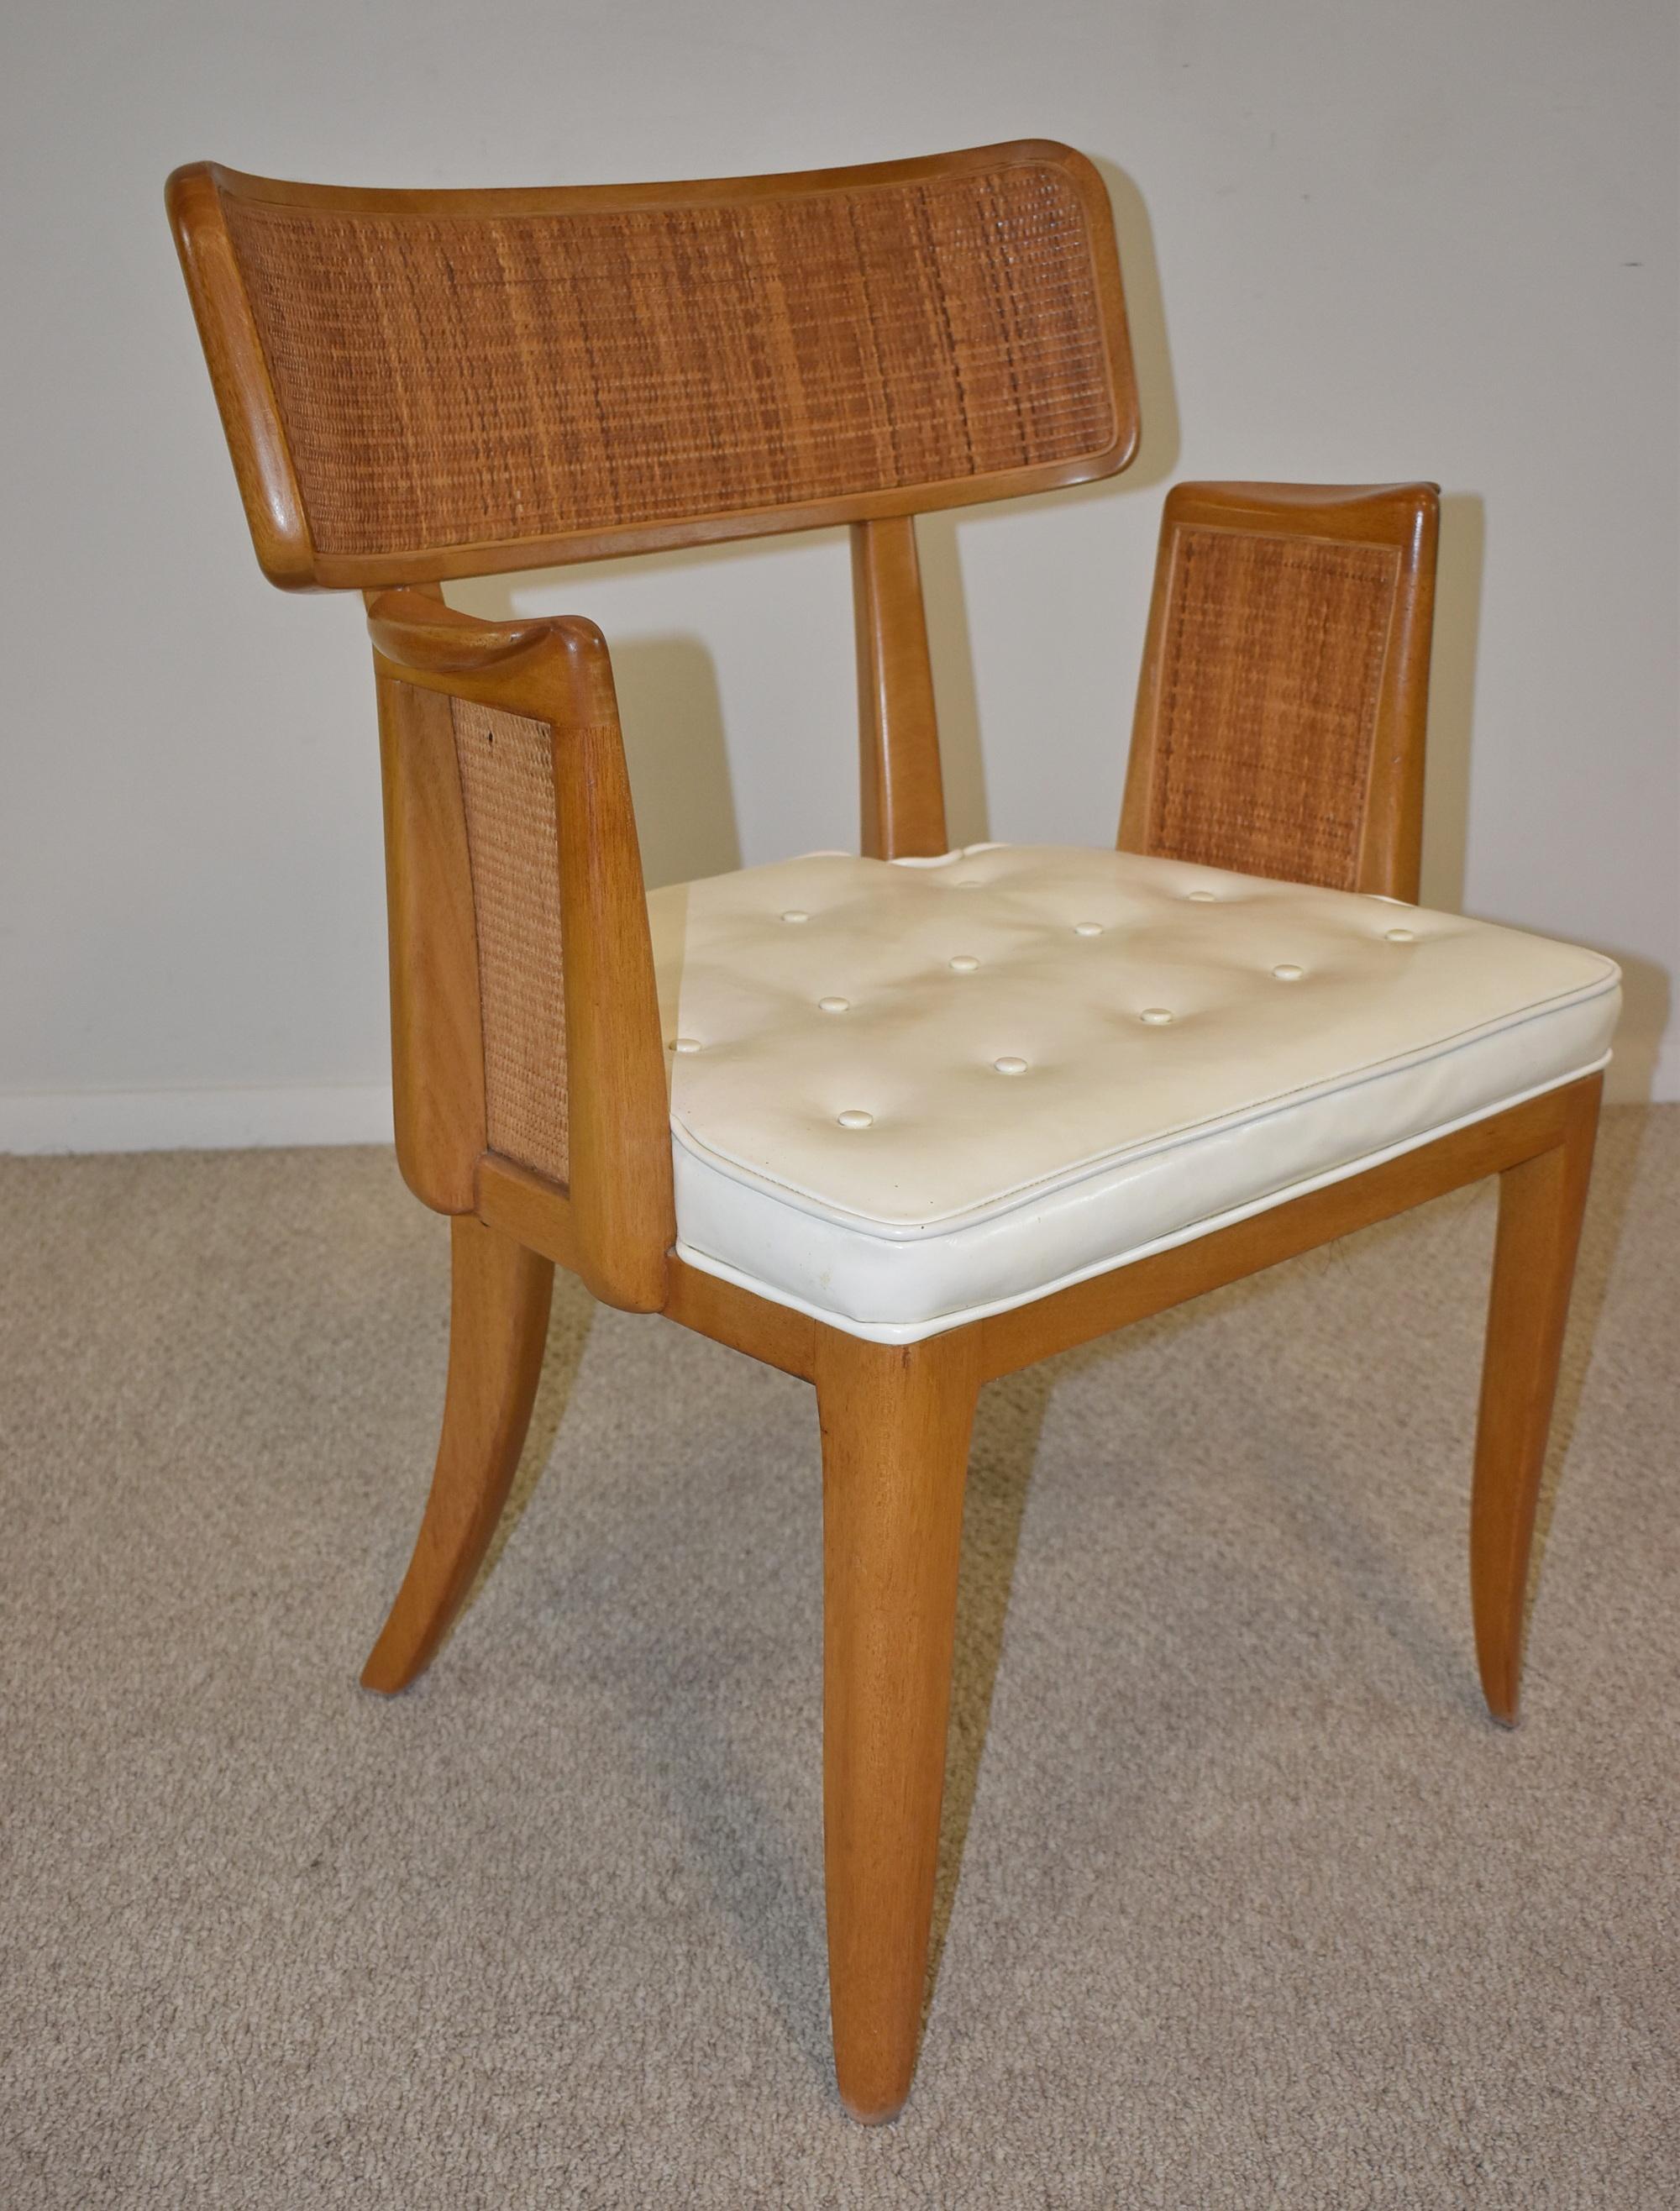 Six Vintage Dunbar Dining Chairs Cane Back Edward Wormley Design, circa 1950's For Sale 1